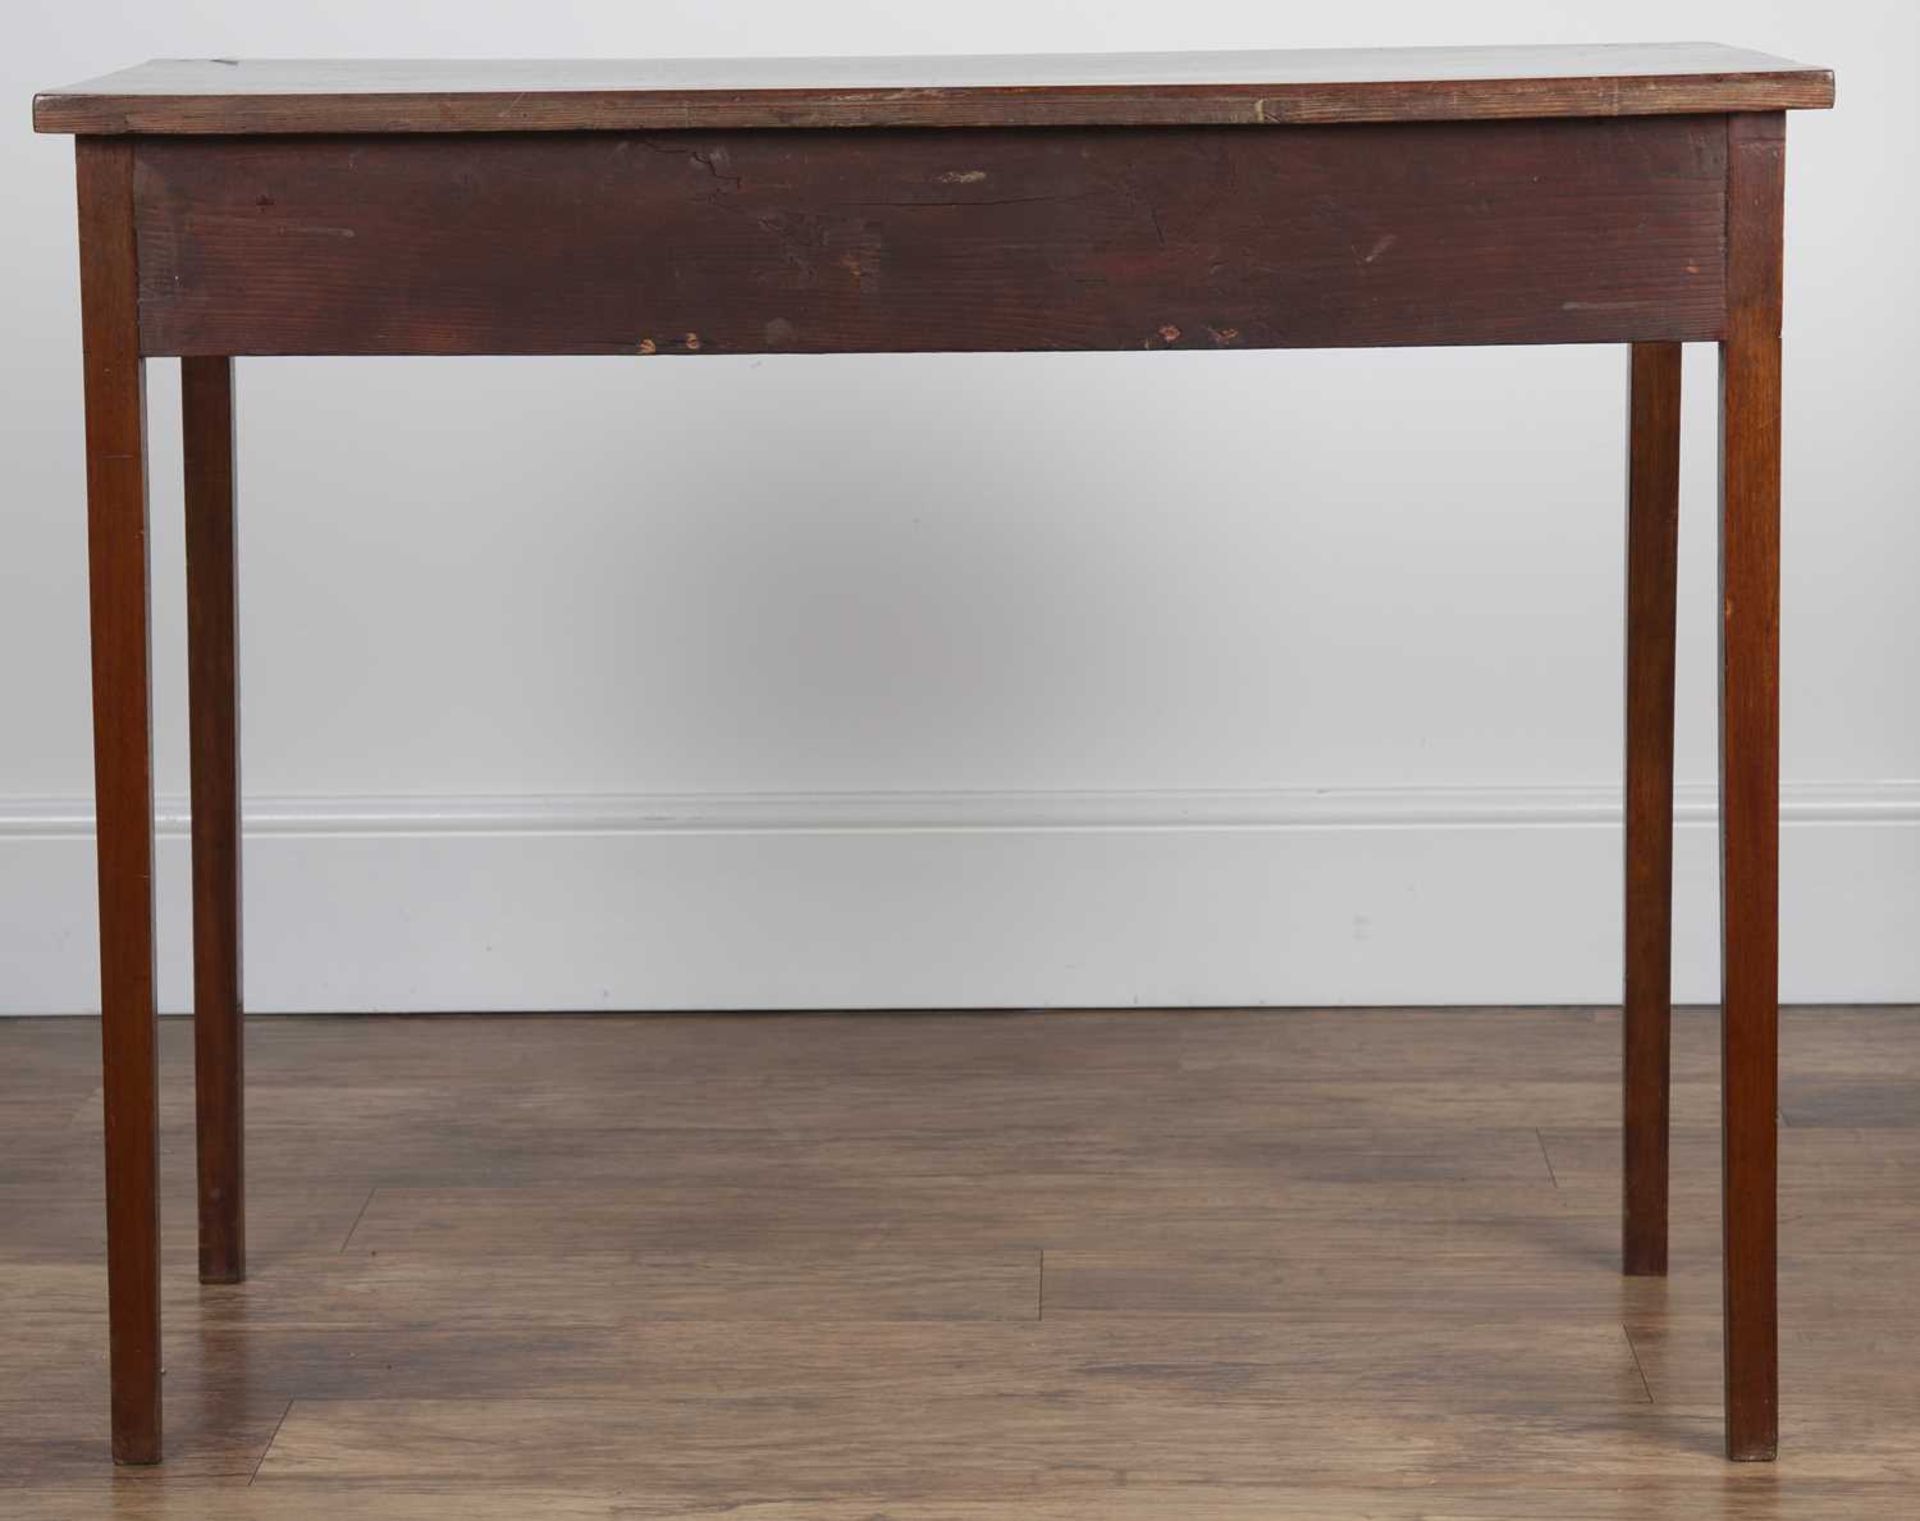 Mahogany side table 19th Century, fitted with three frieze drawers and round brass handles, standing - Image 4 of 6